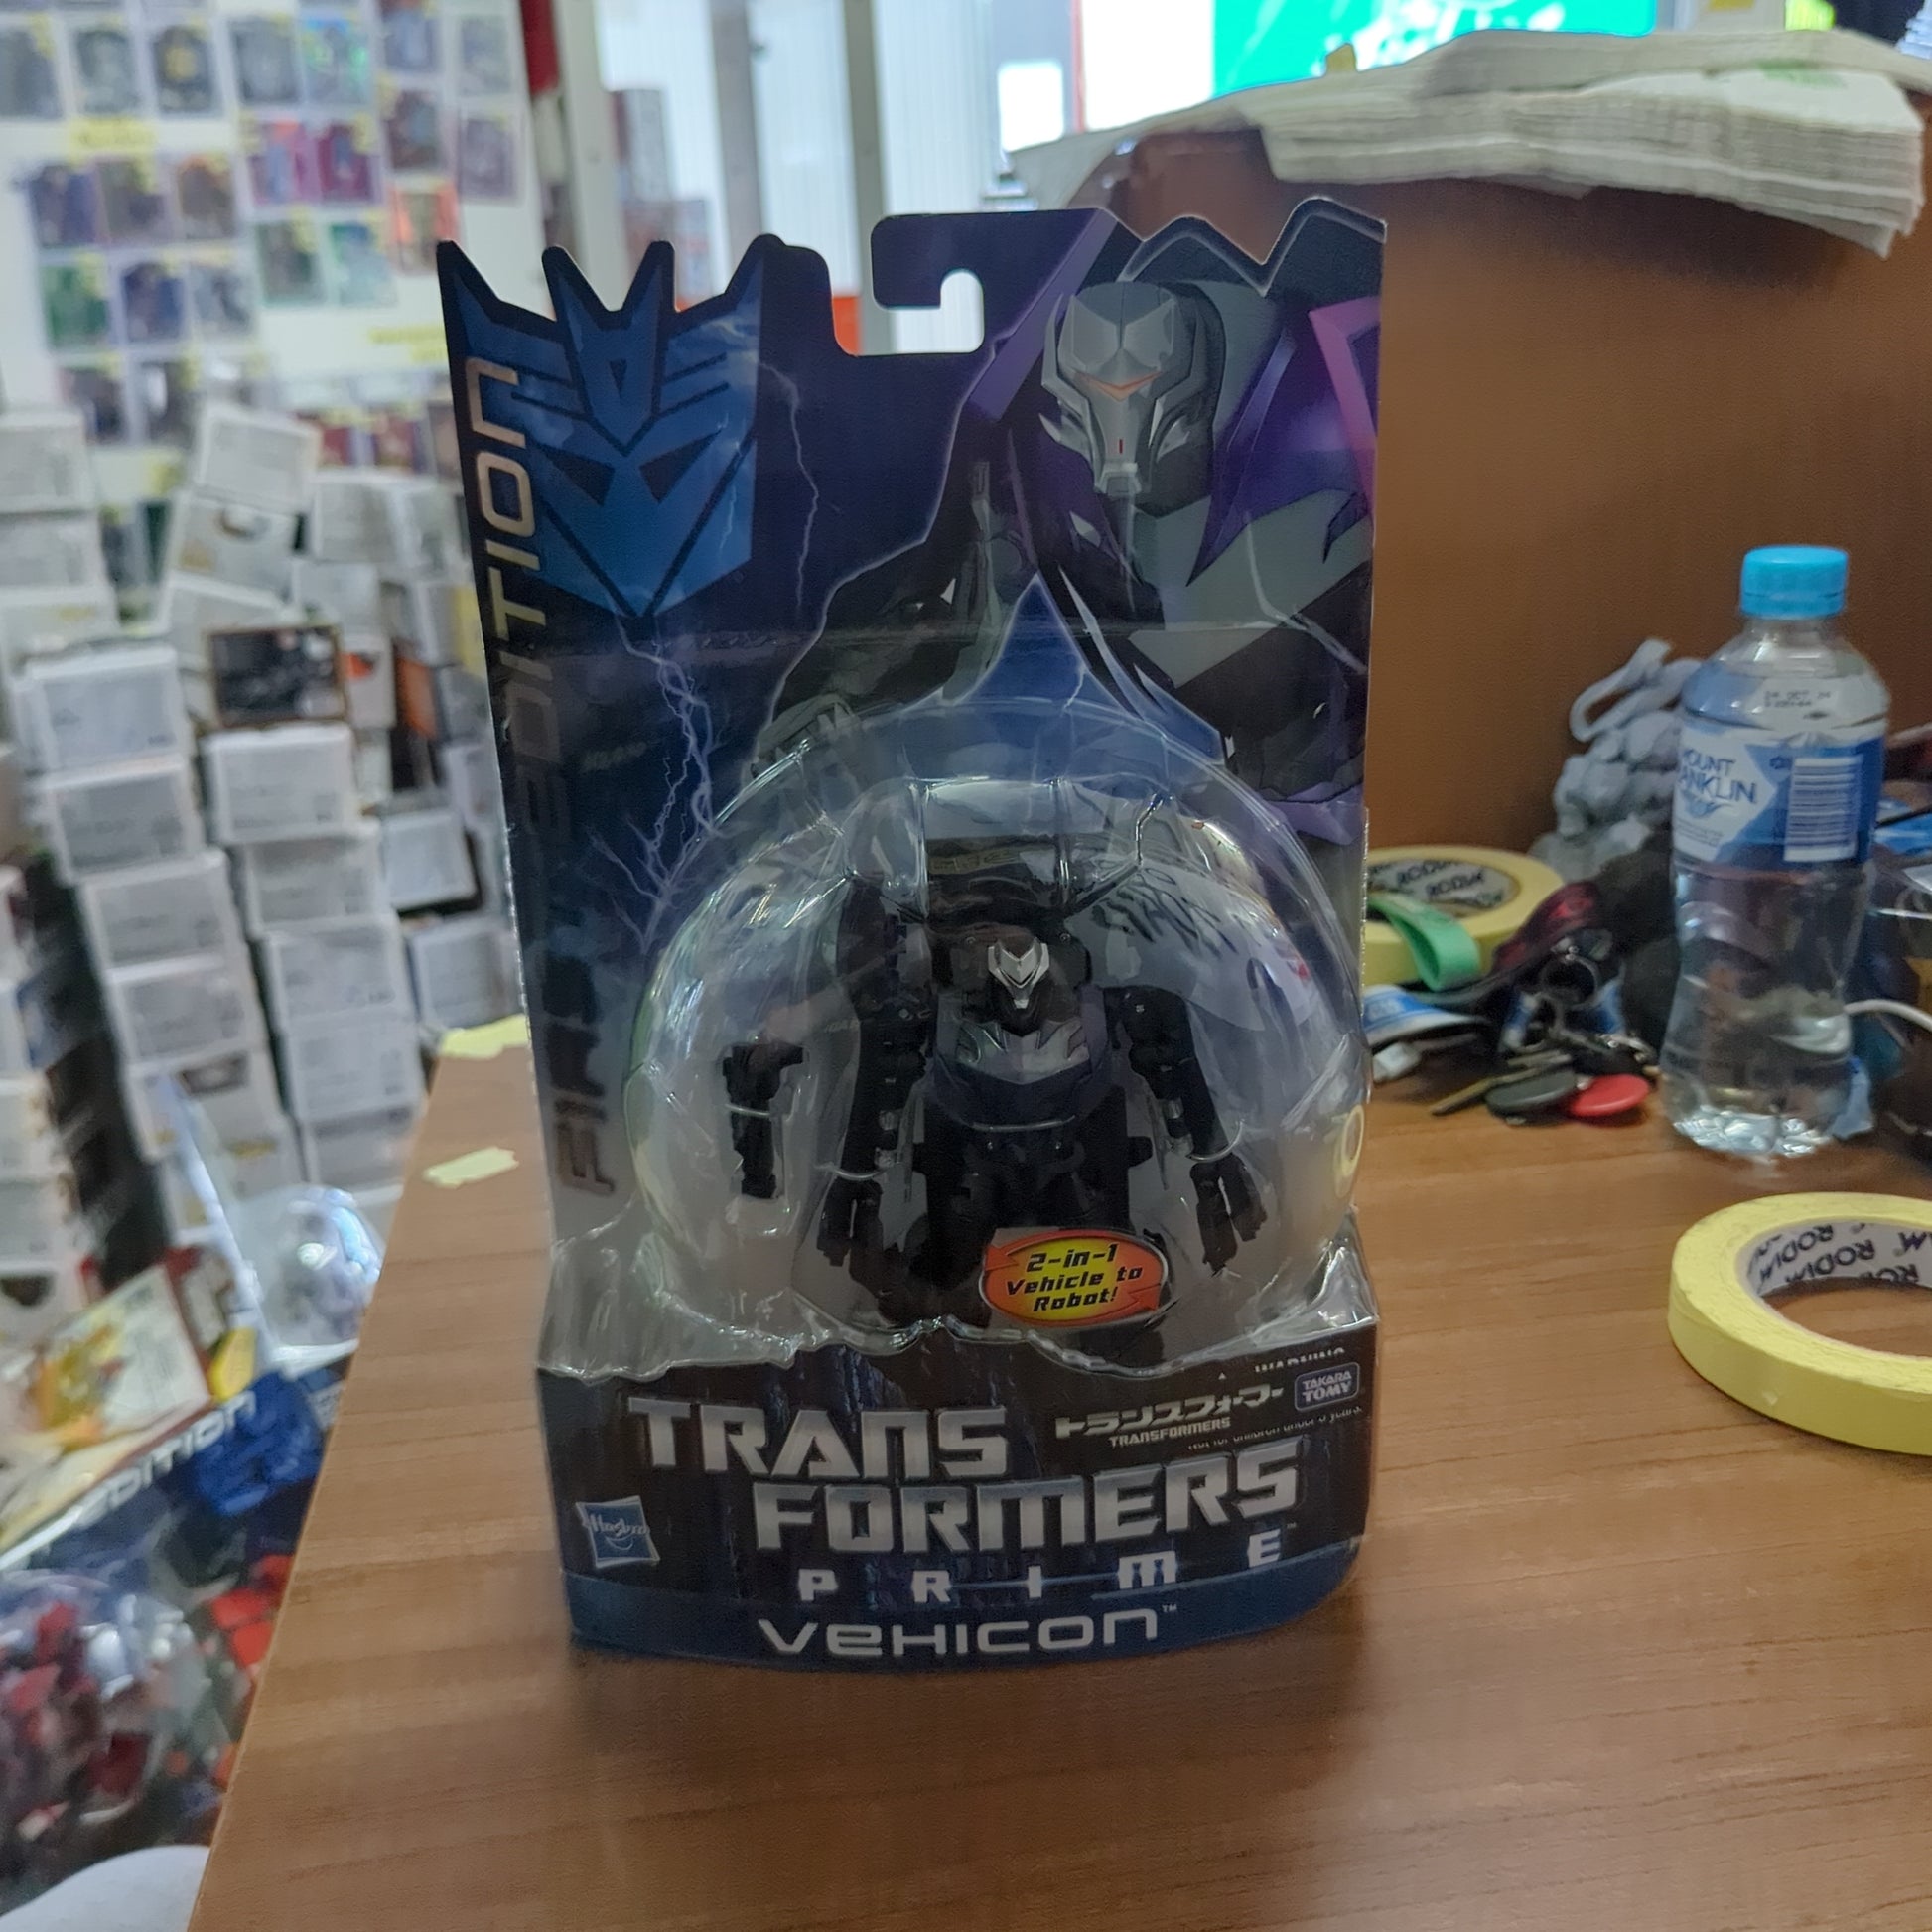 TAKARA Transformers Prime First Edition Deluxe Class VEHICON FRENLY BRICKS - Open 7 Days